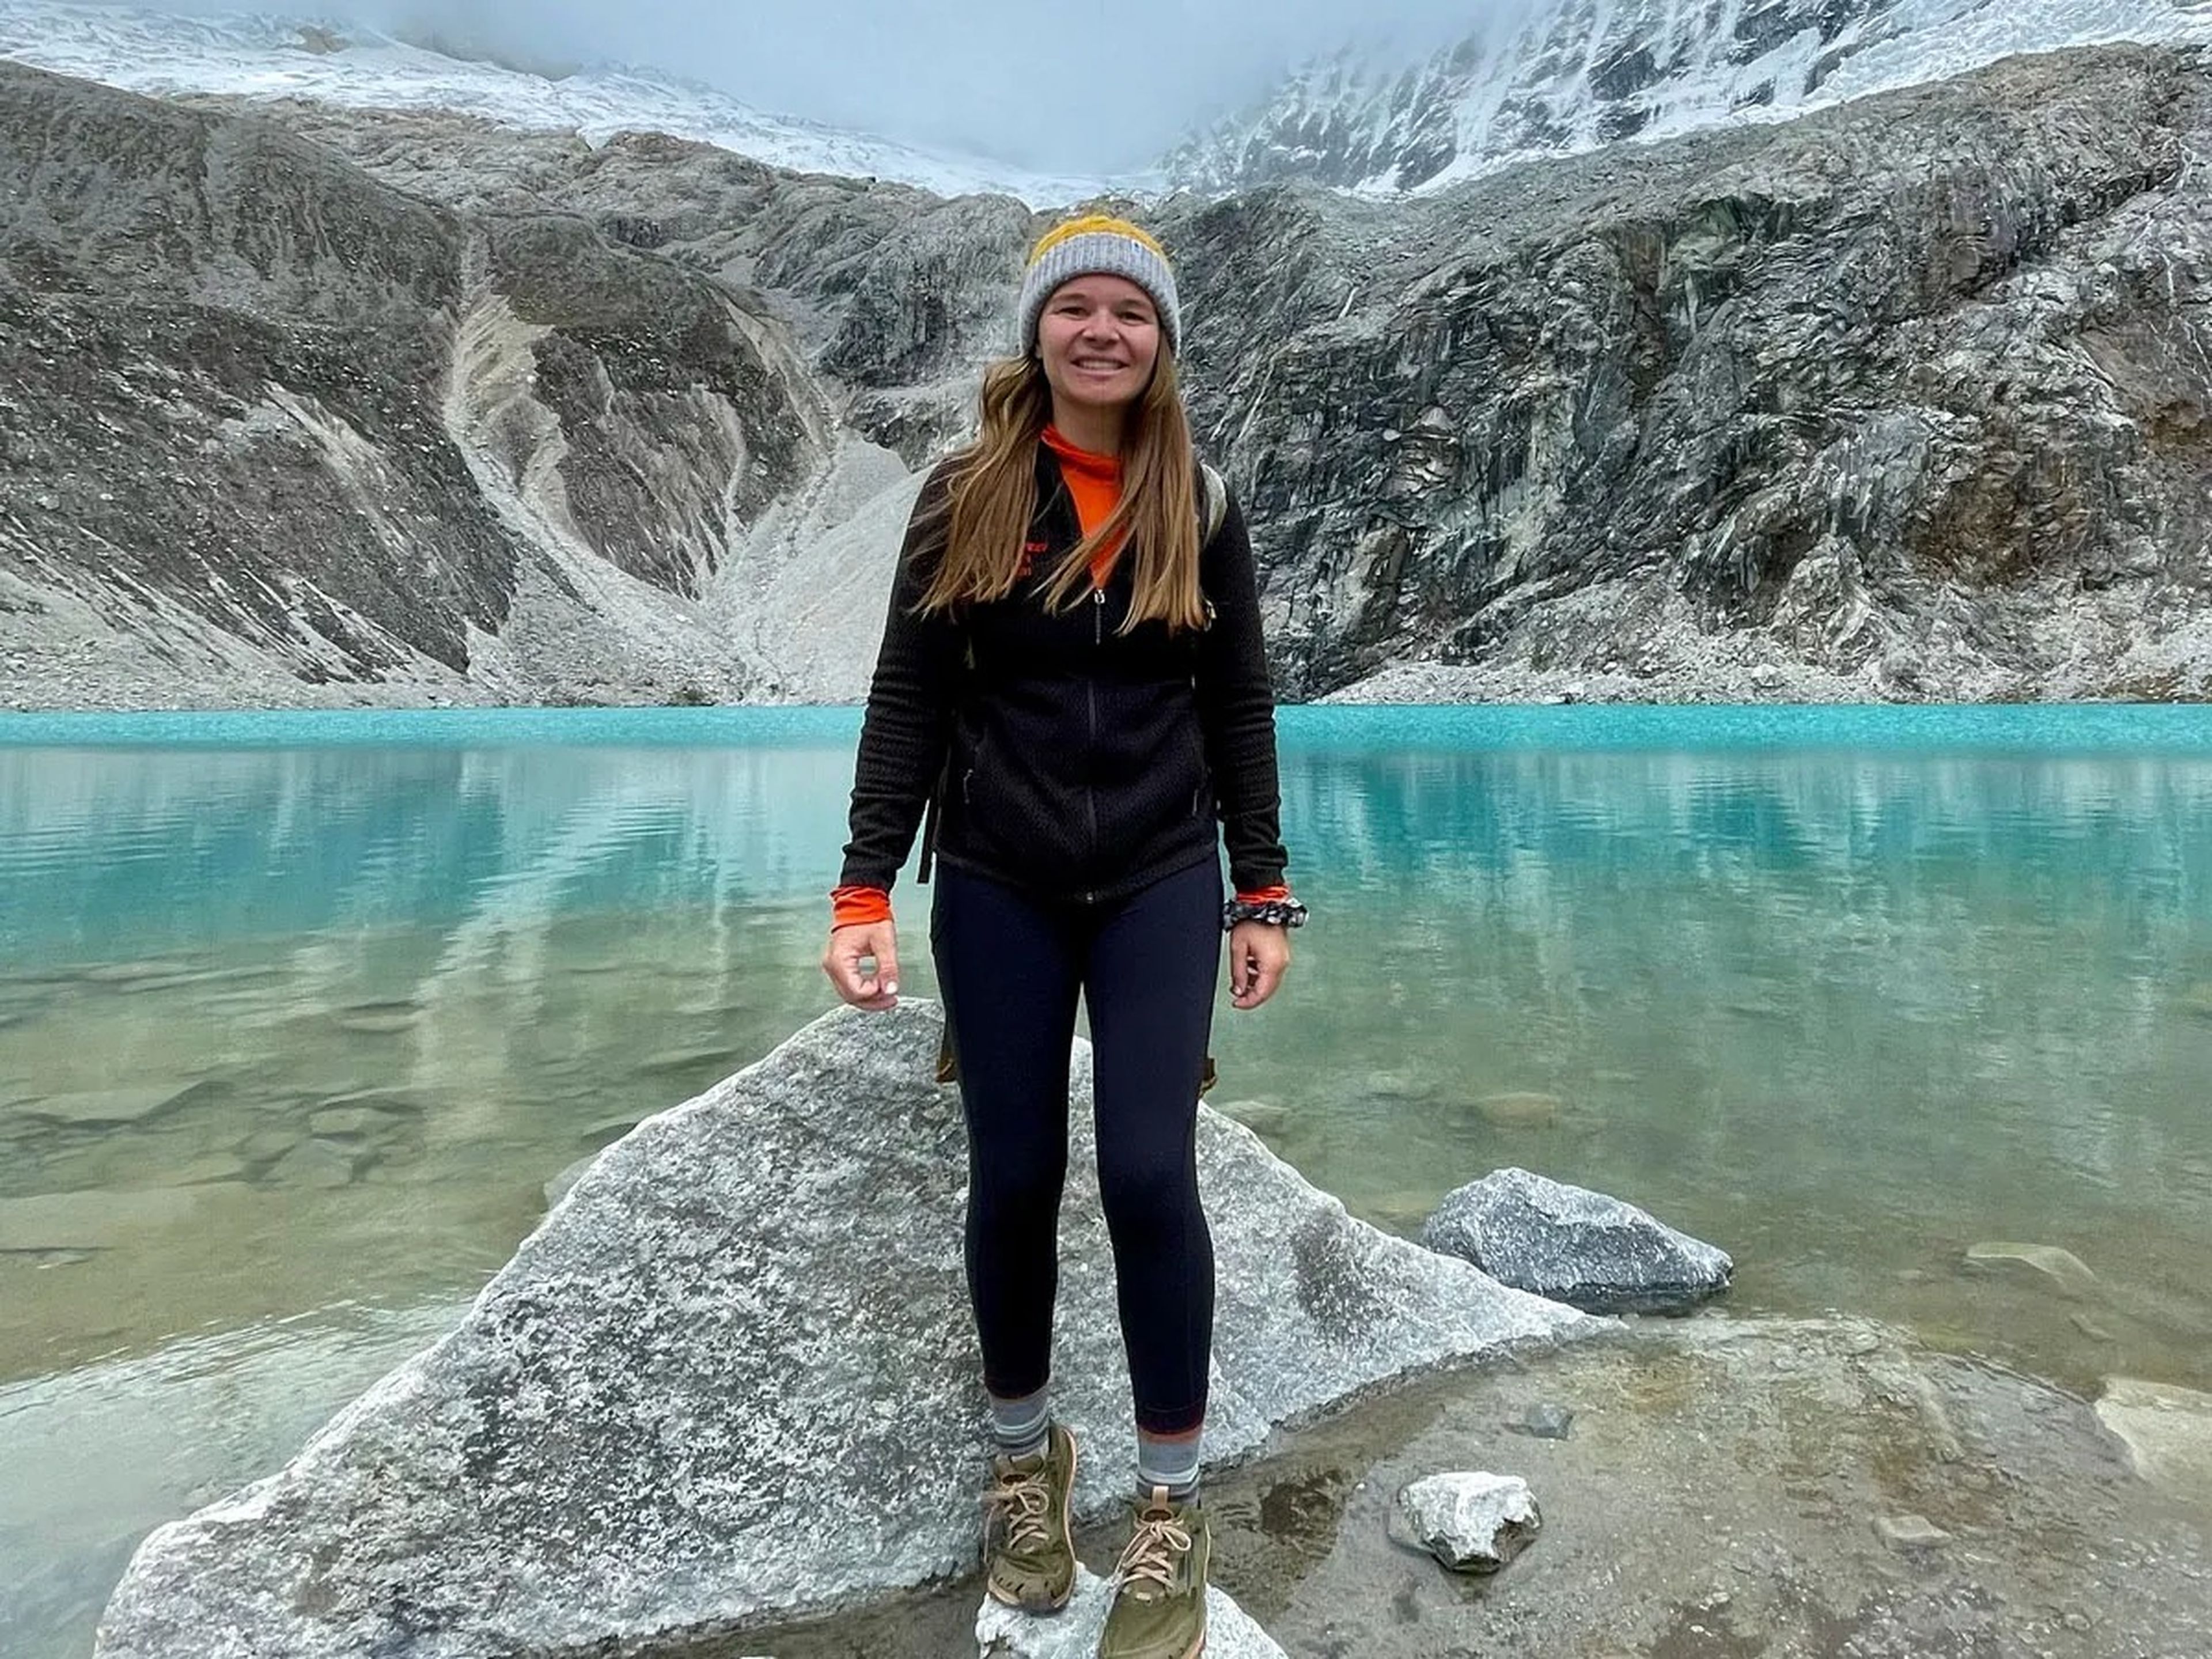 Nicole Jones standing in front of clear blue lake and mountains behind her